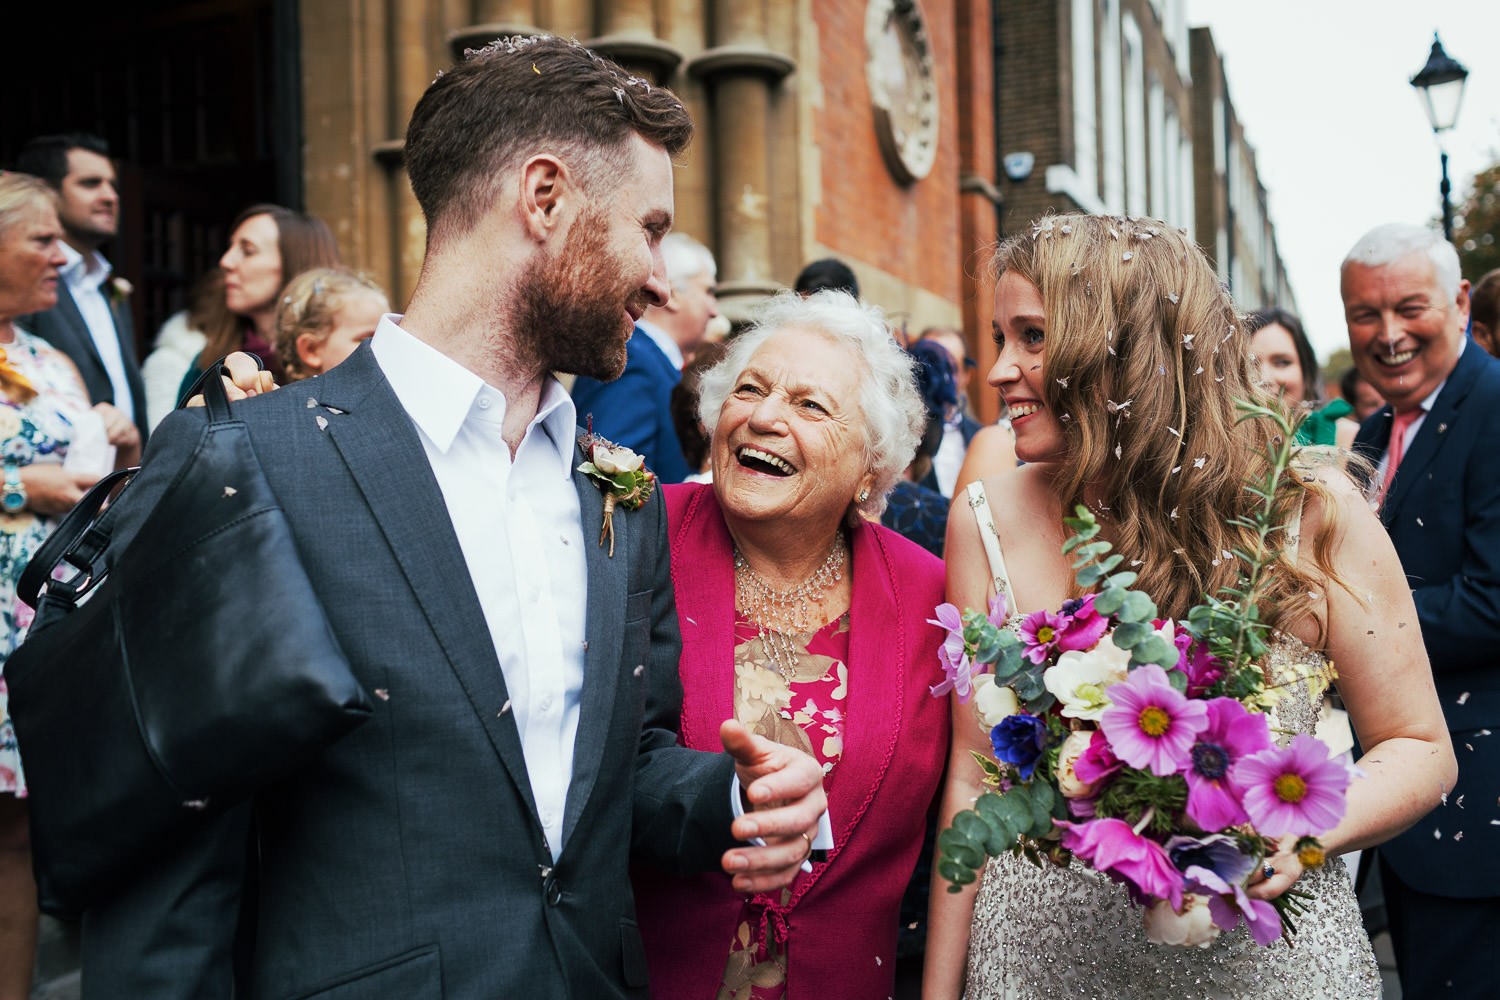 London wedding photography outside the Union Chapel. A grandmother looks up at the groom, the bride is next to her holding flowers.